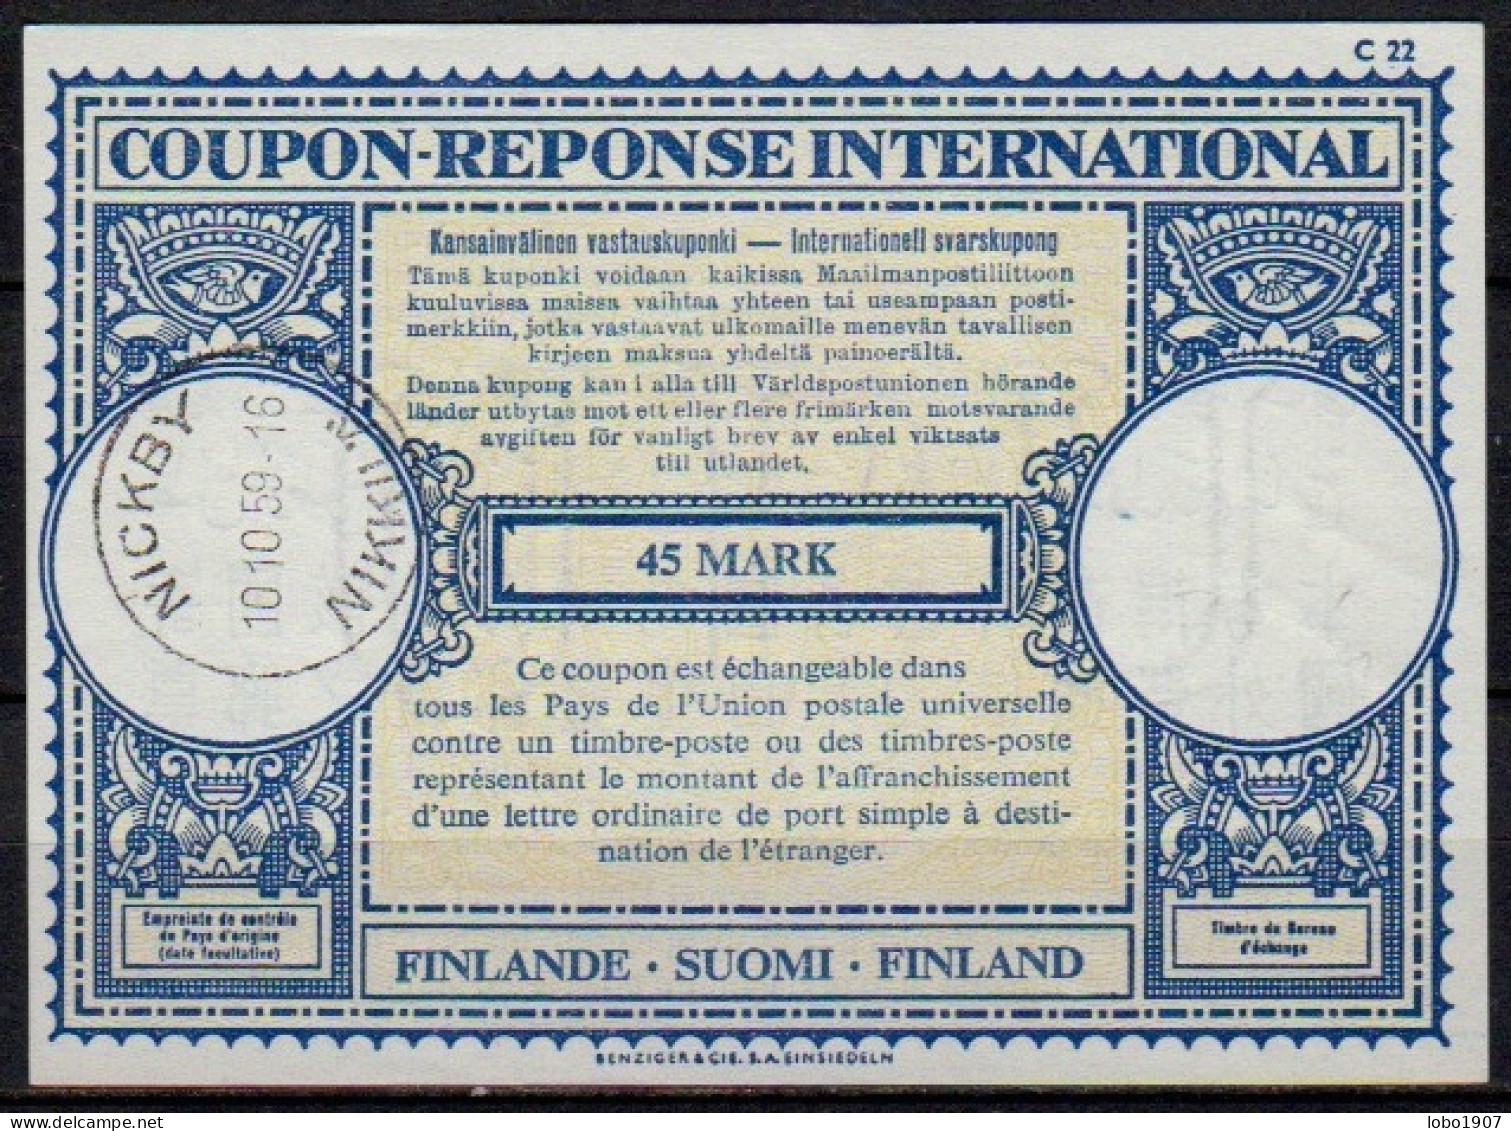 FINLAND and ALAND Collection 19 International Reply Coupon Reponse Cupon Respuesta IRC IAS see list / scans of most IRC